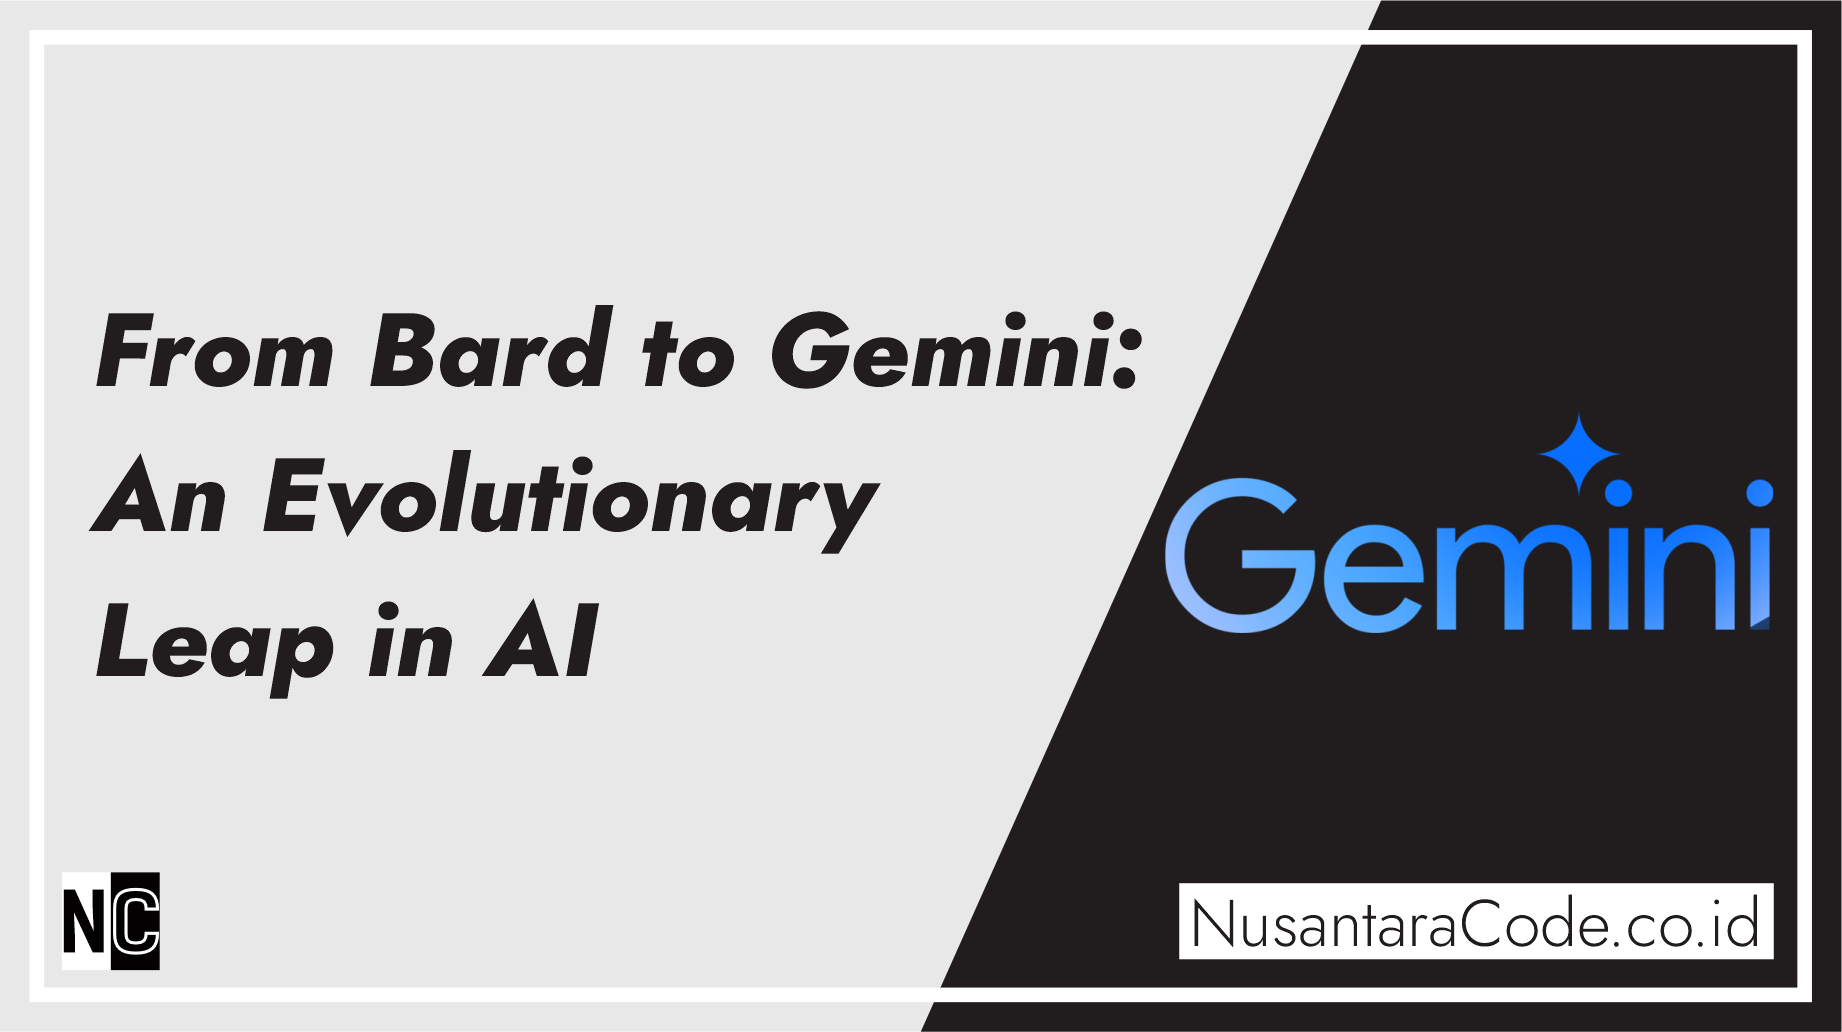 From Bard to Gemini: An Evolutionary Leap in AI